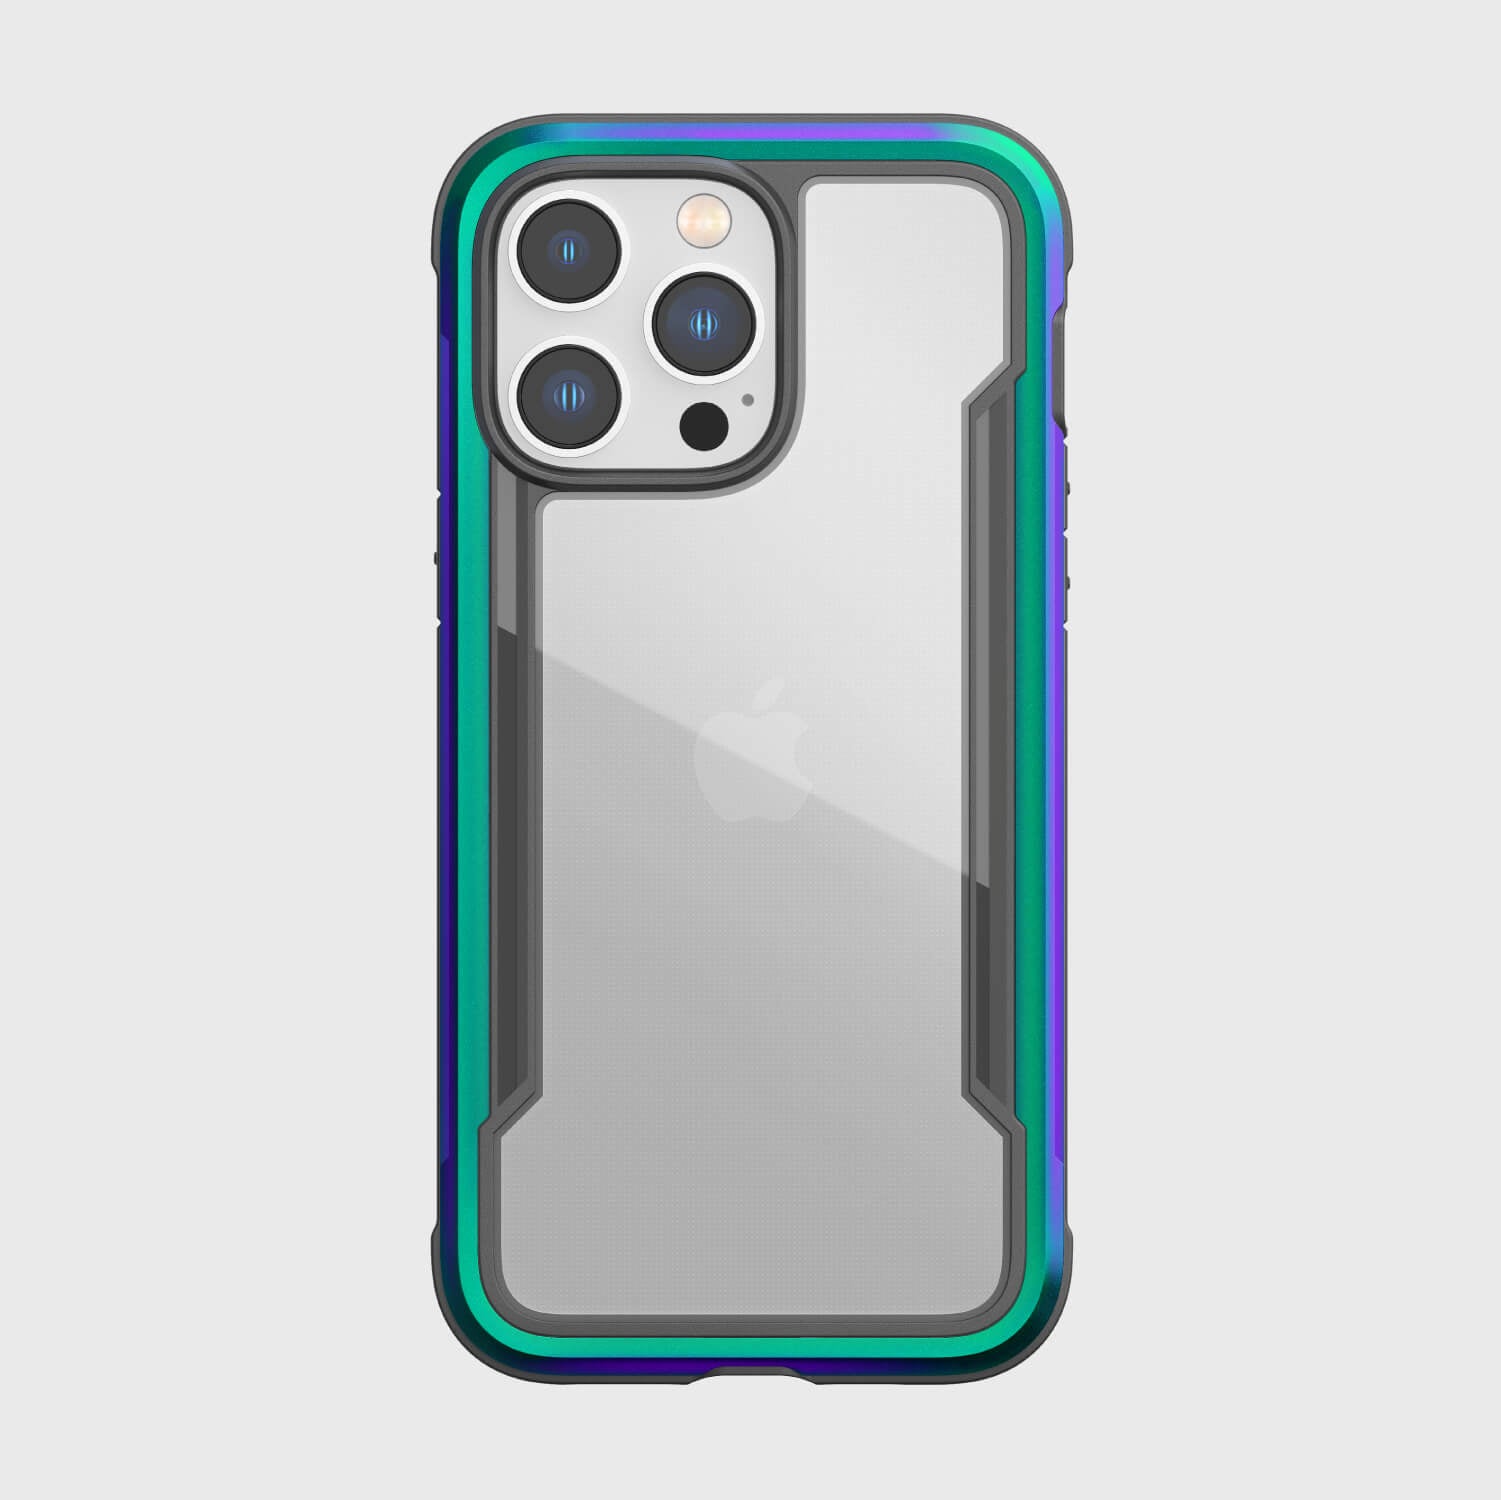 The iPhone 14/15 Pro Max Case - Shield by Raptic is shown in blue and green.